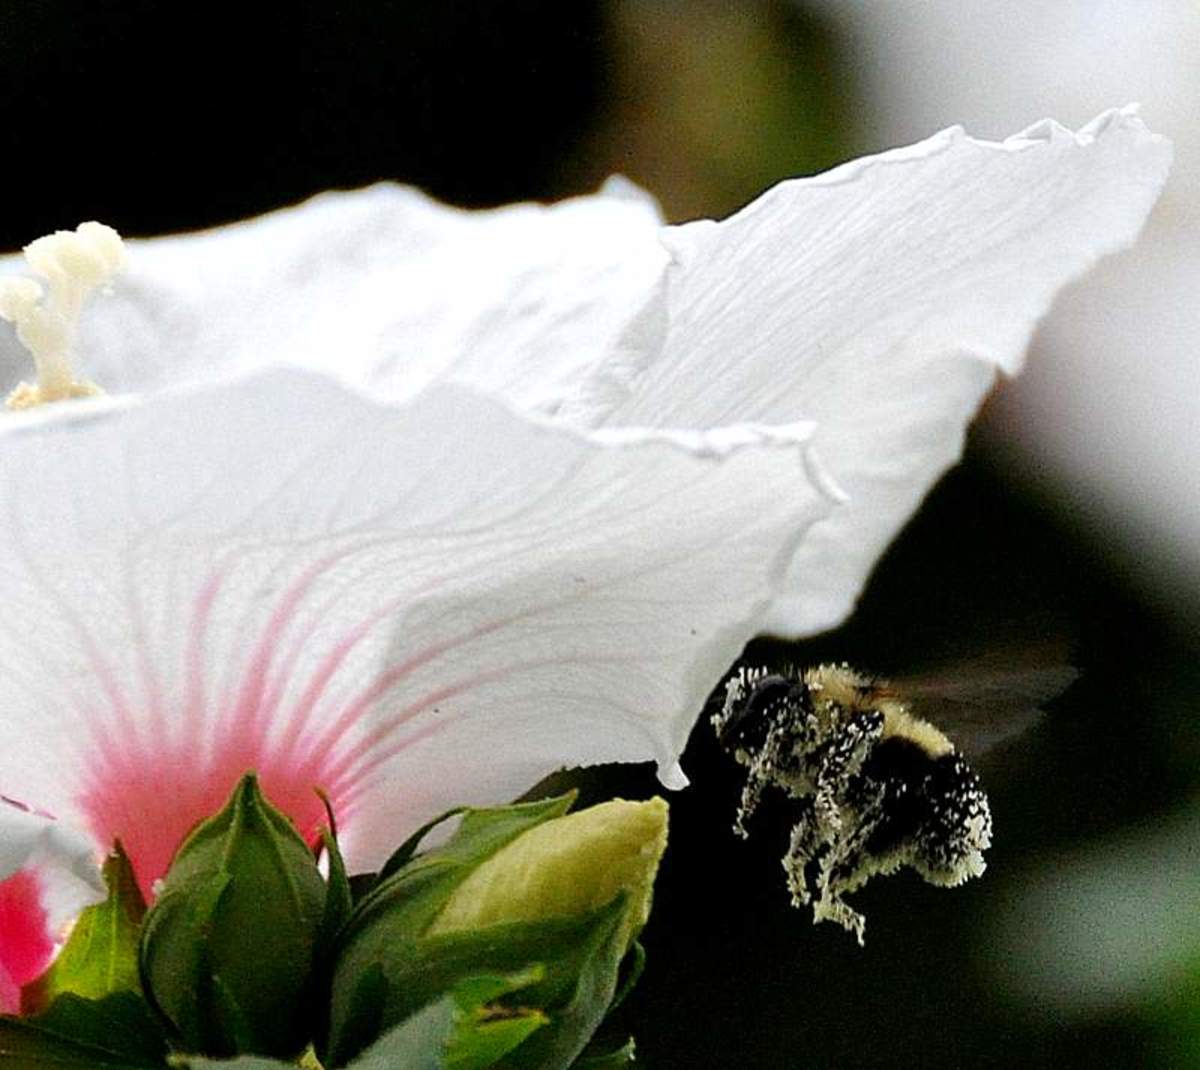 Bumble Bee, covered with pollen from what I am guessing is some kind of Hibiscus.